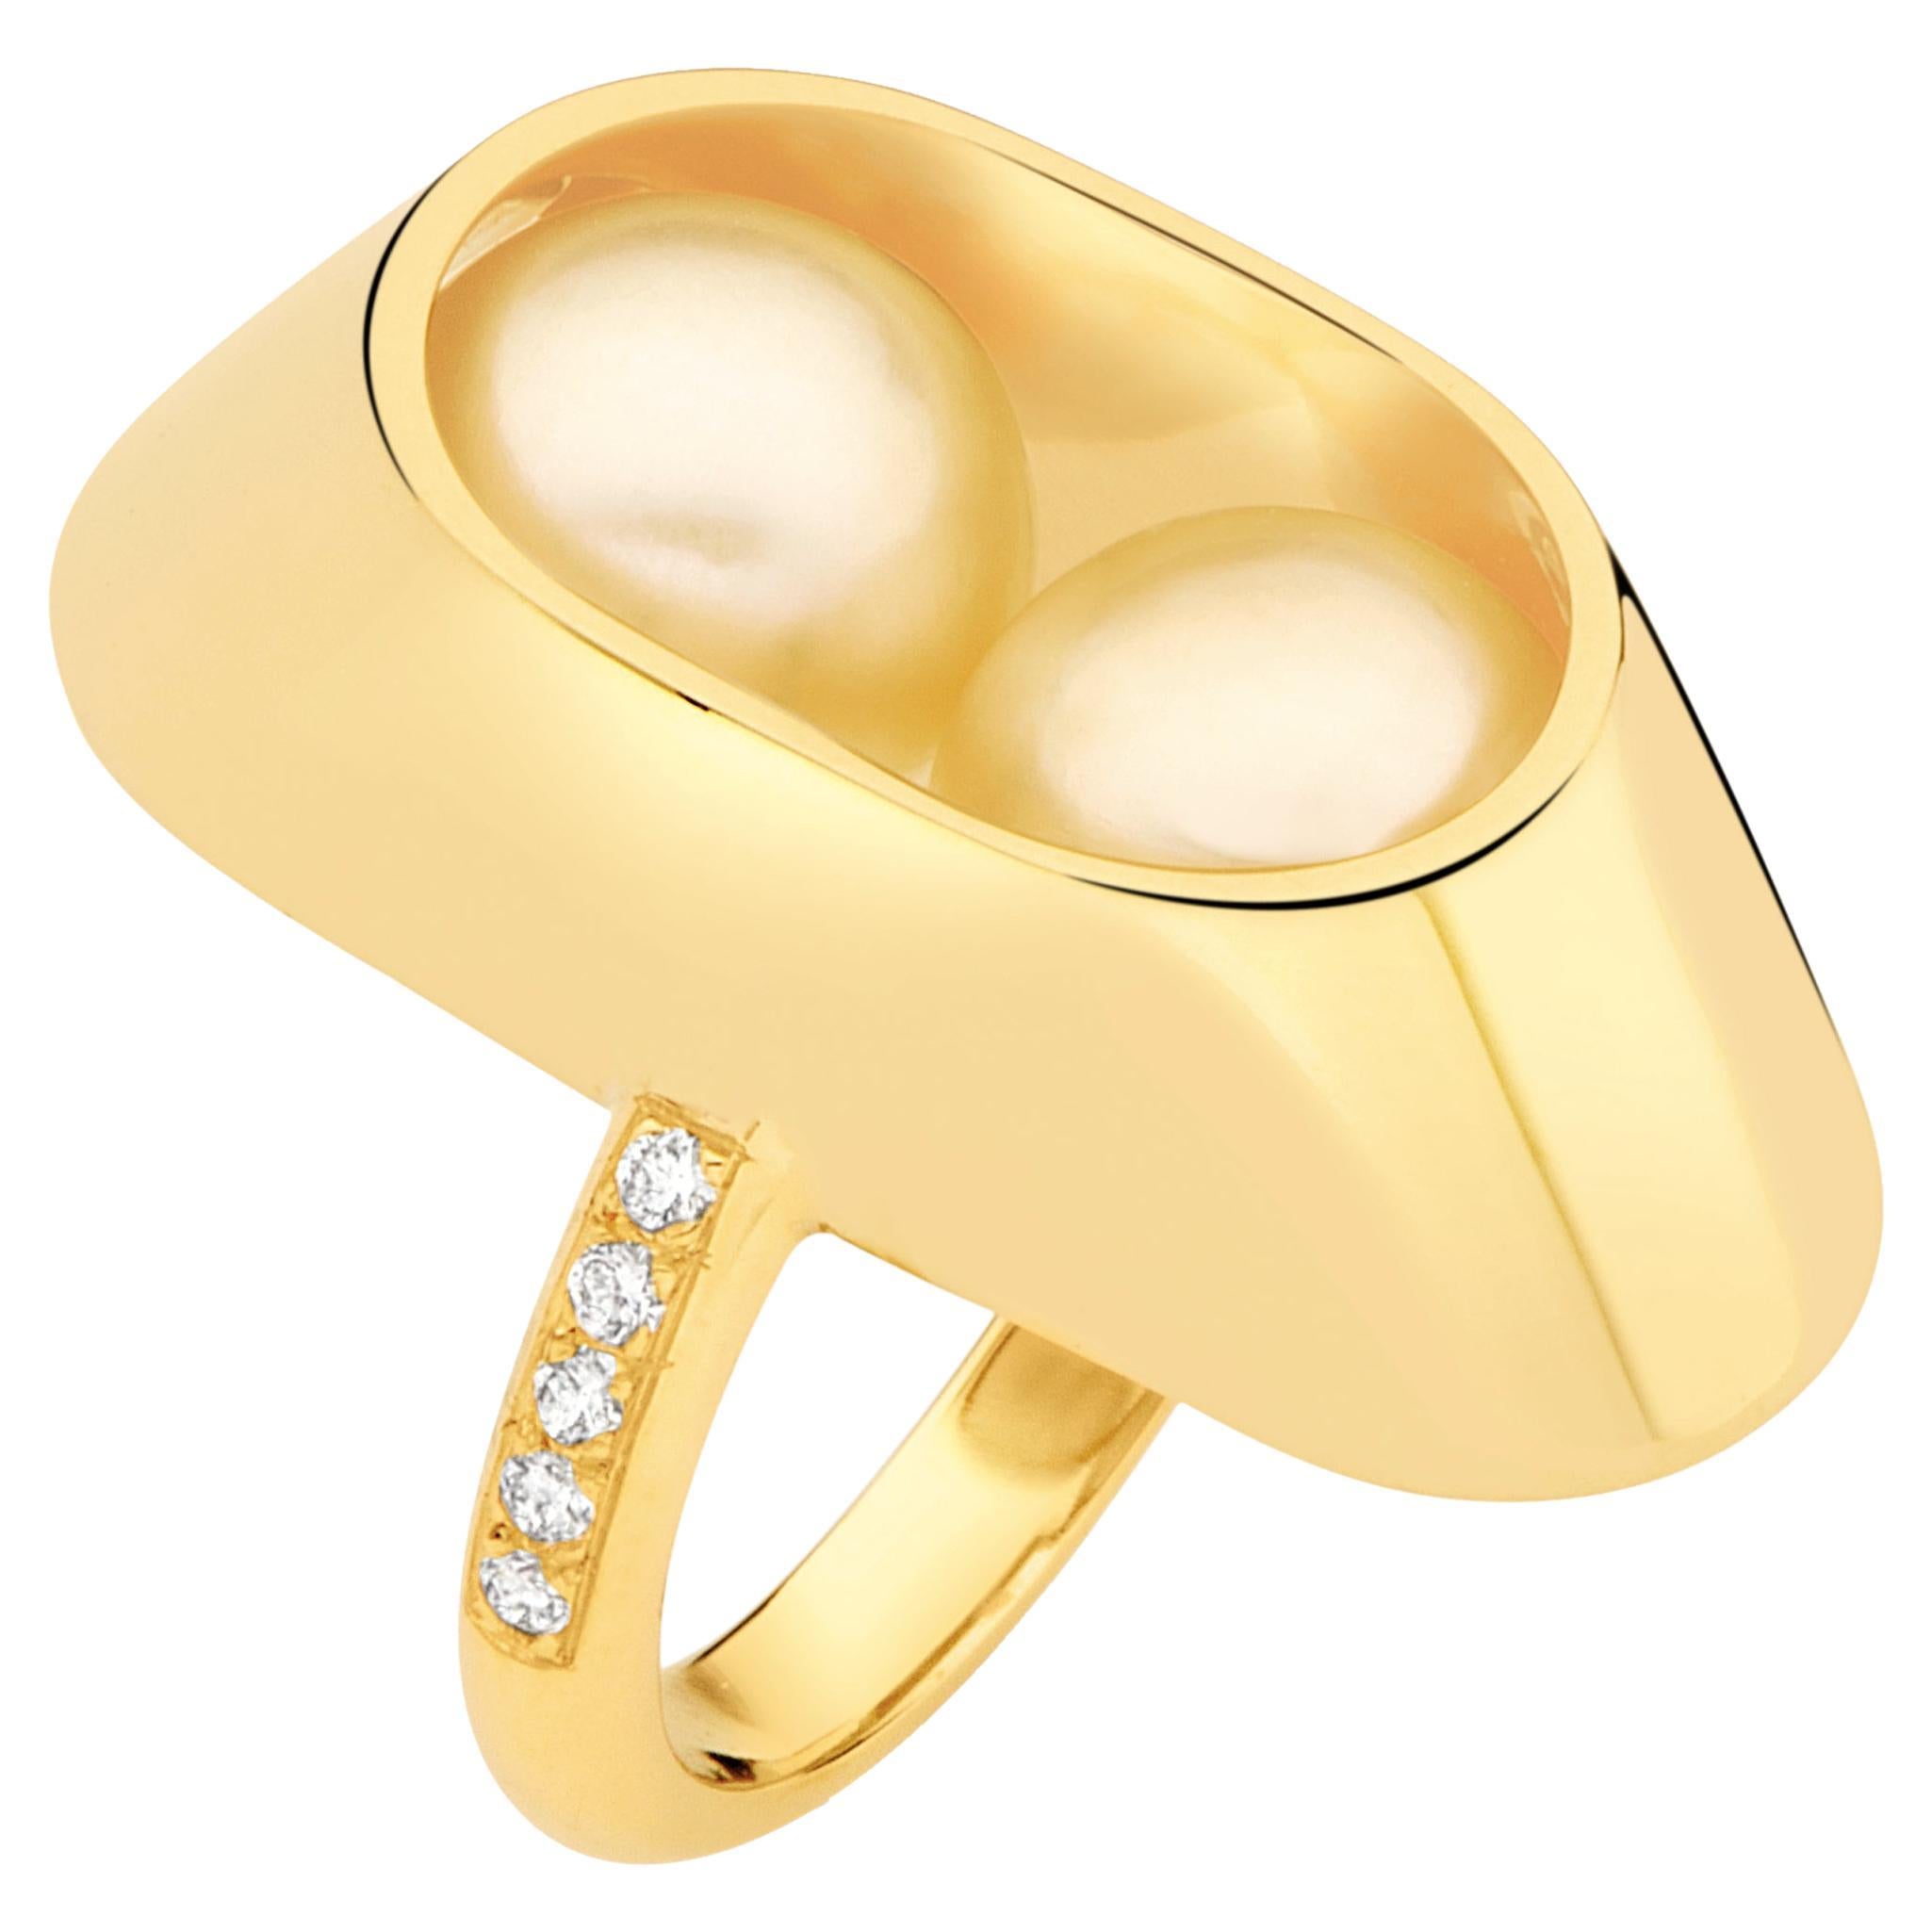 Yael Sonia's 18 Karat Yellow Gold, Diamonds, South Sea Pearls Cocoon Large Ring For Sale